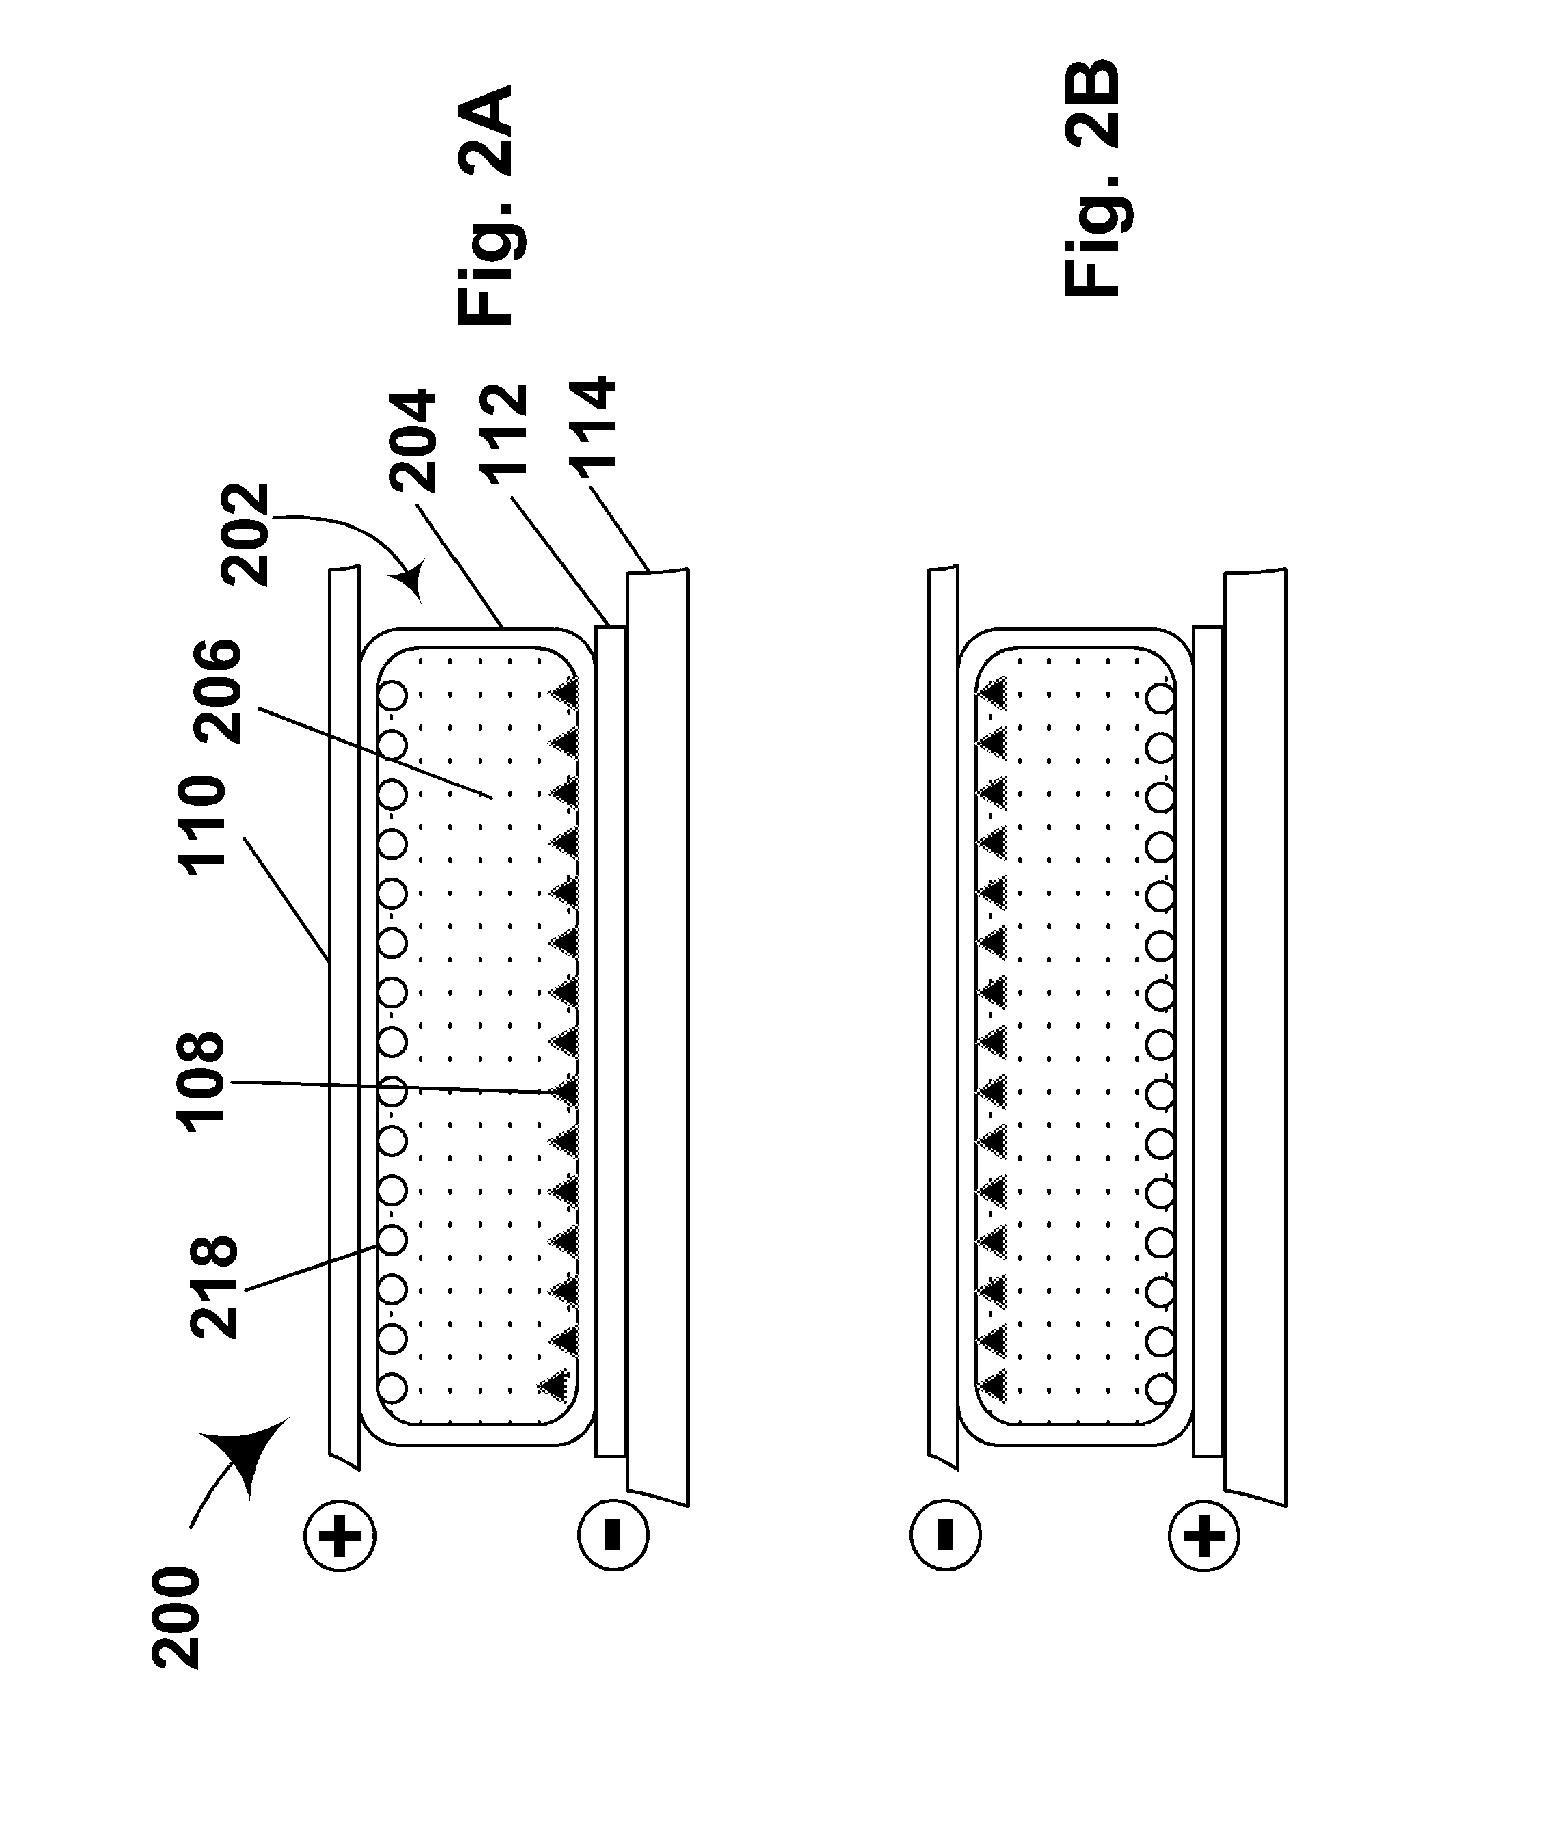 Electrophoretic media and processes for the production thereof